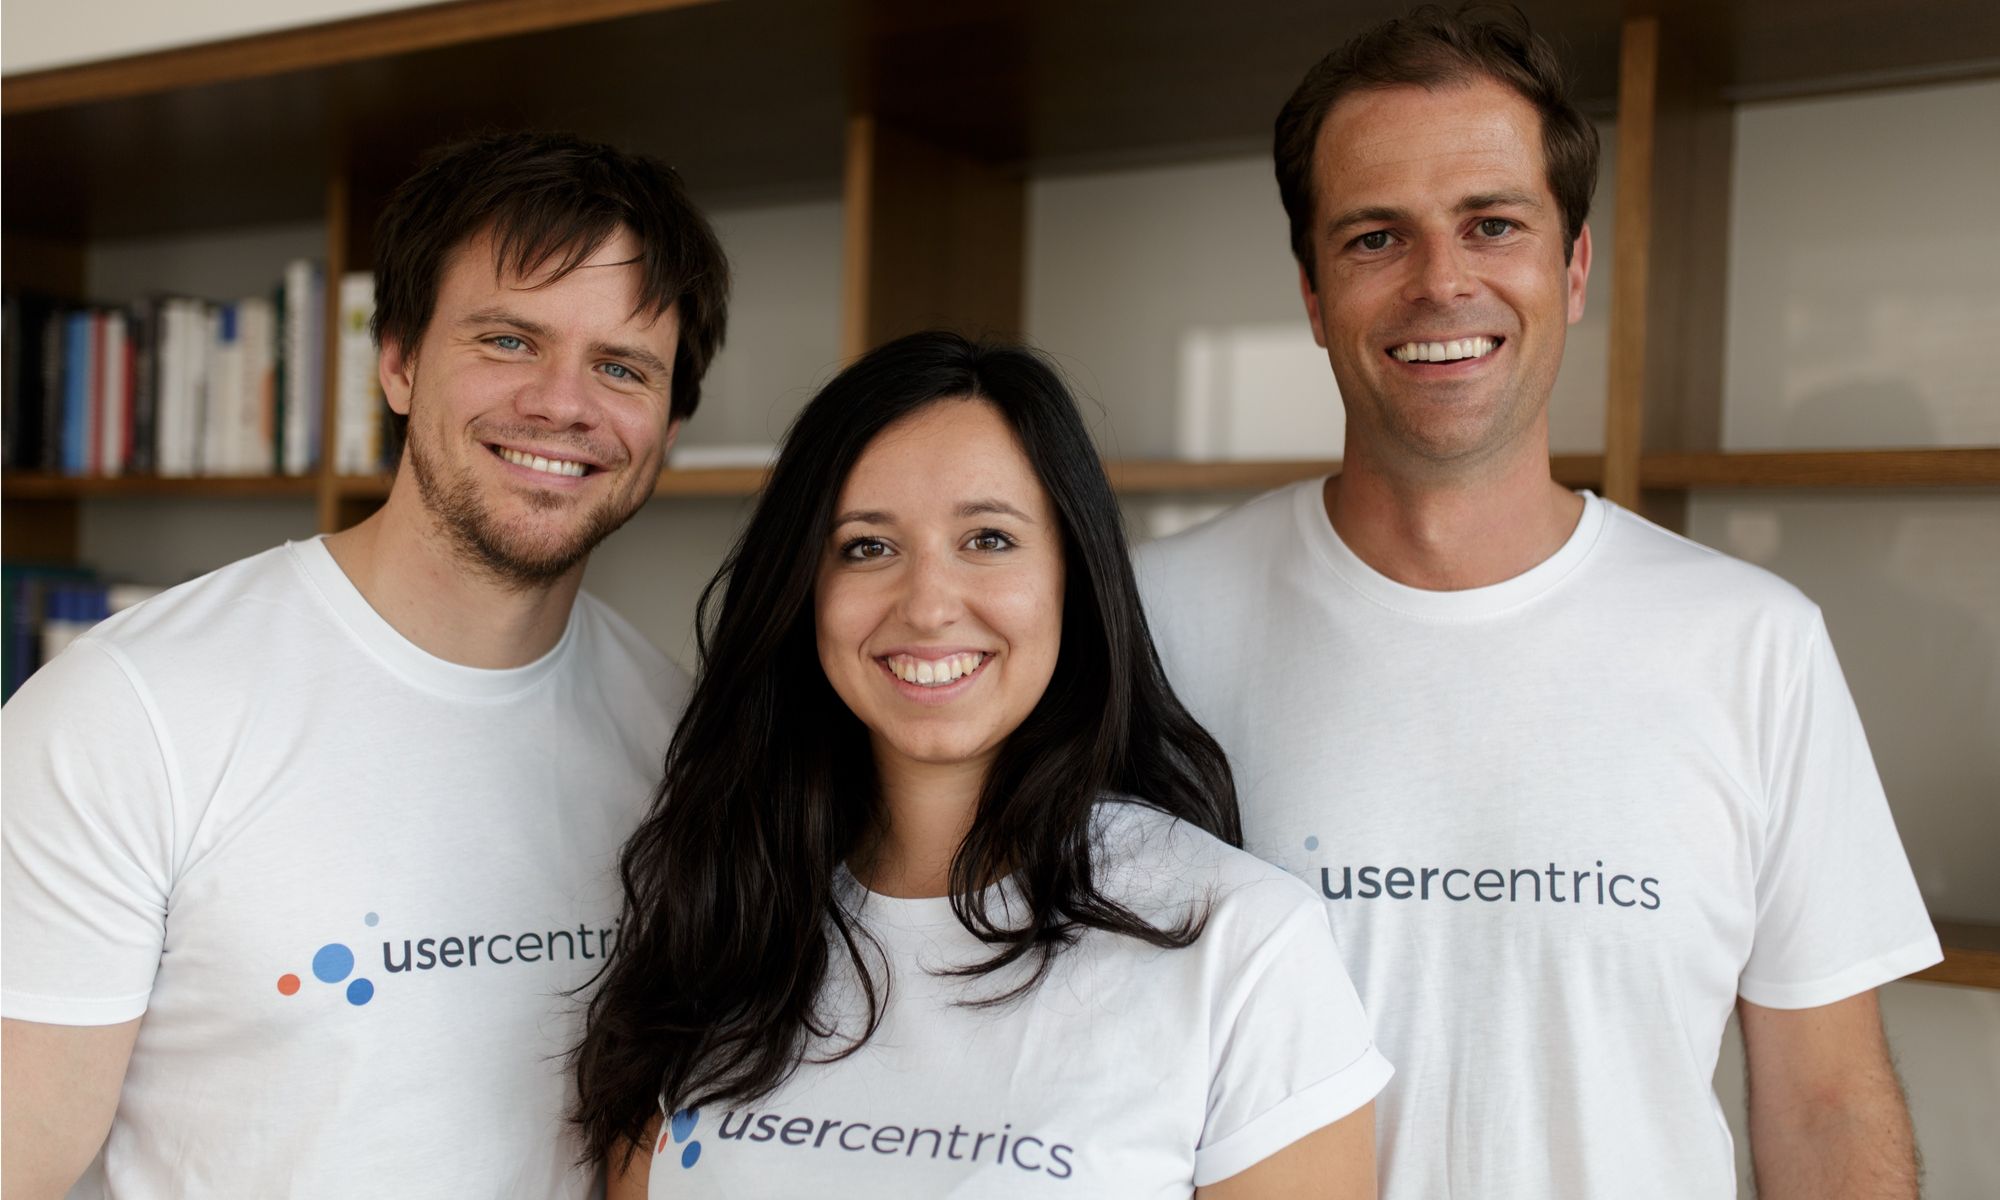 Usercentrics CMP receives new funding to accelerate global expansion